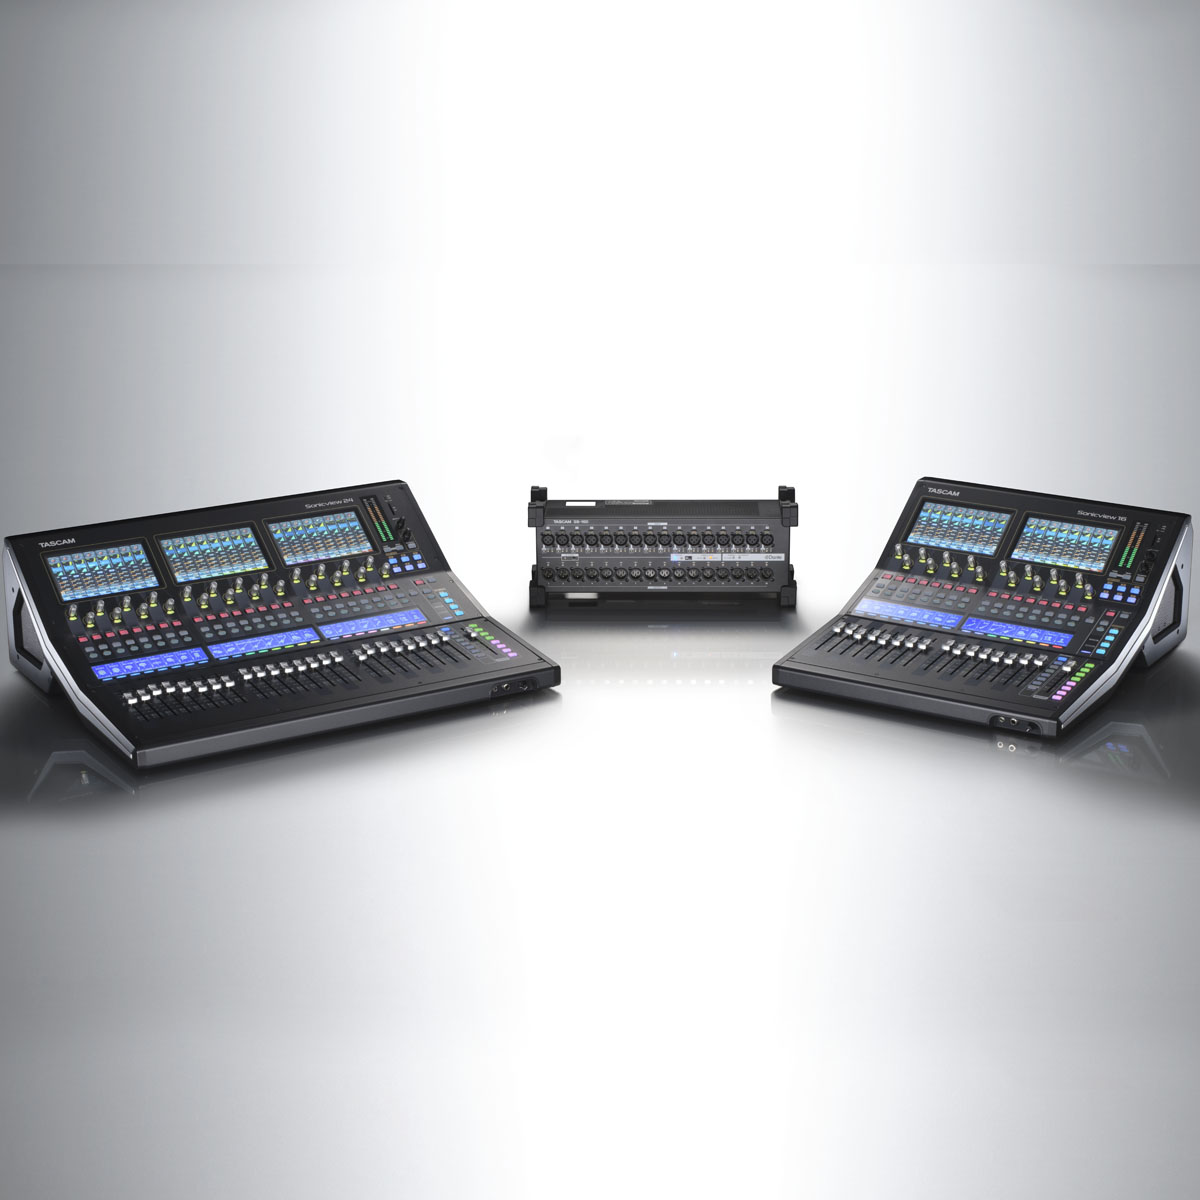 Announcement Regarding V1.6.0 Firmware for TASCAM Sonicview XP Series and V1.20 Firmware for SB-16D